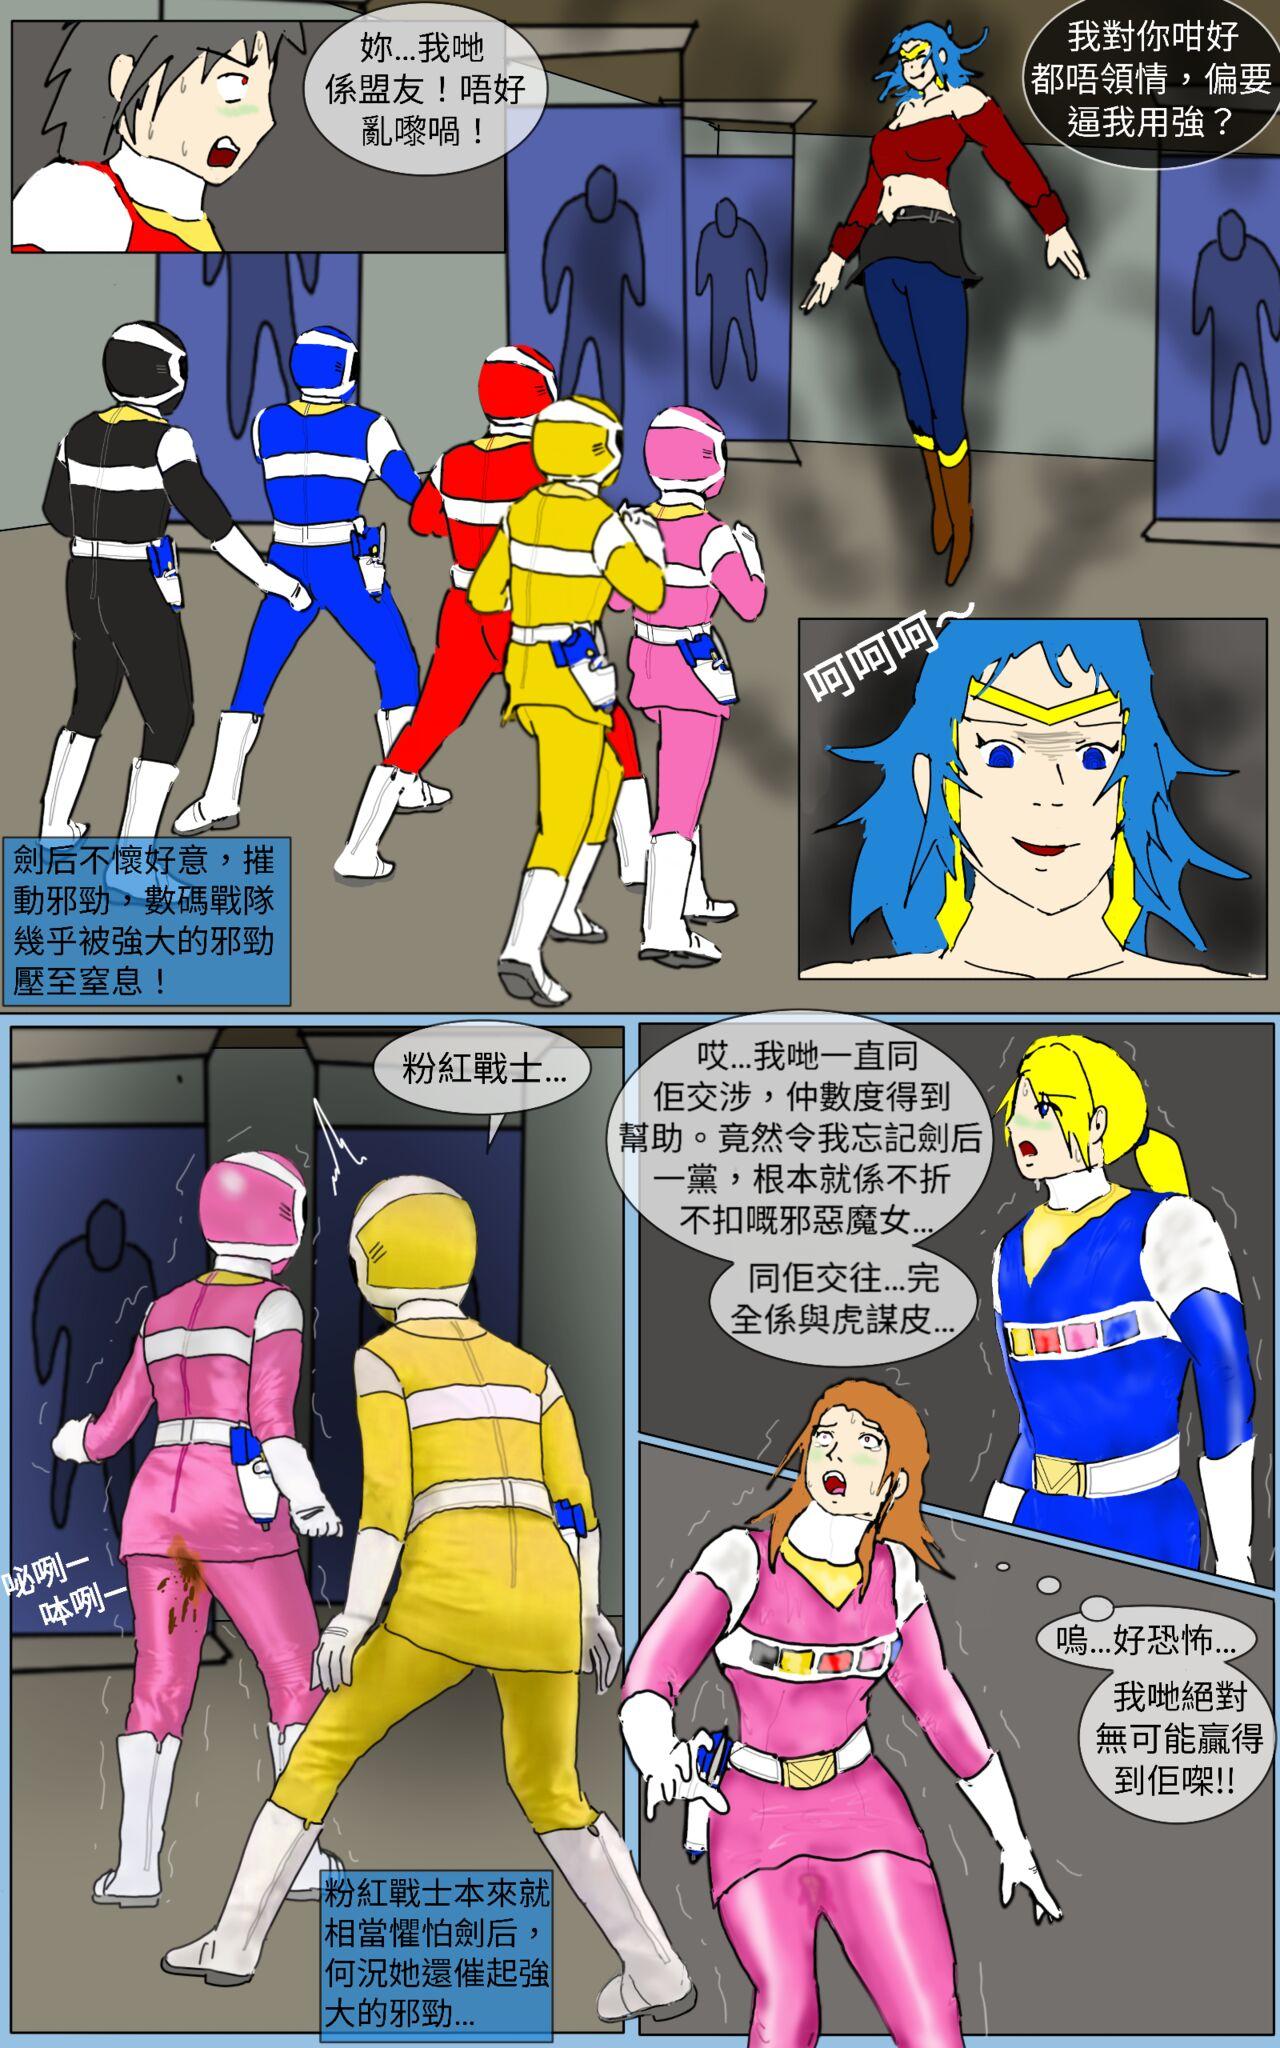 Family Roleplay Mission 32 - Super sentai Mojada - Page 7